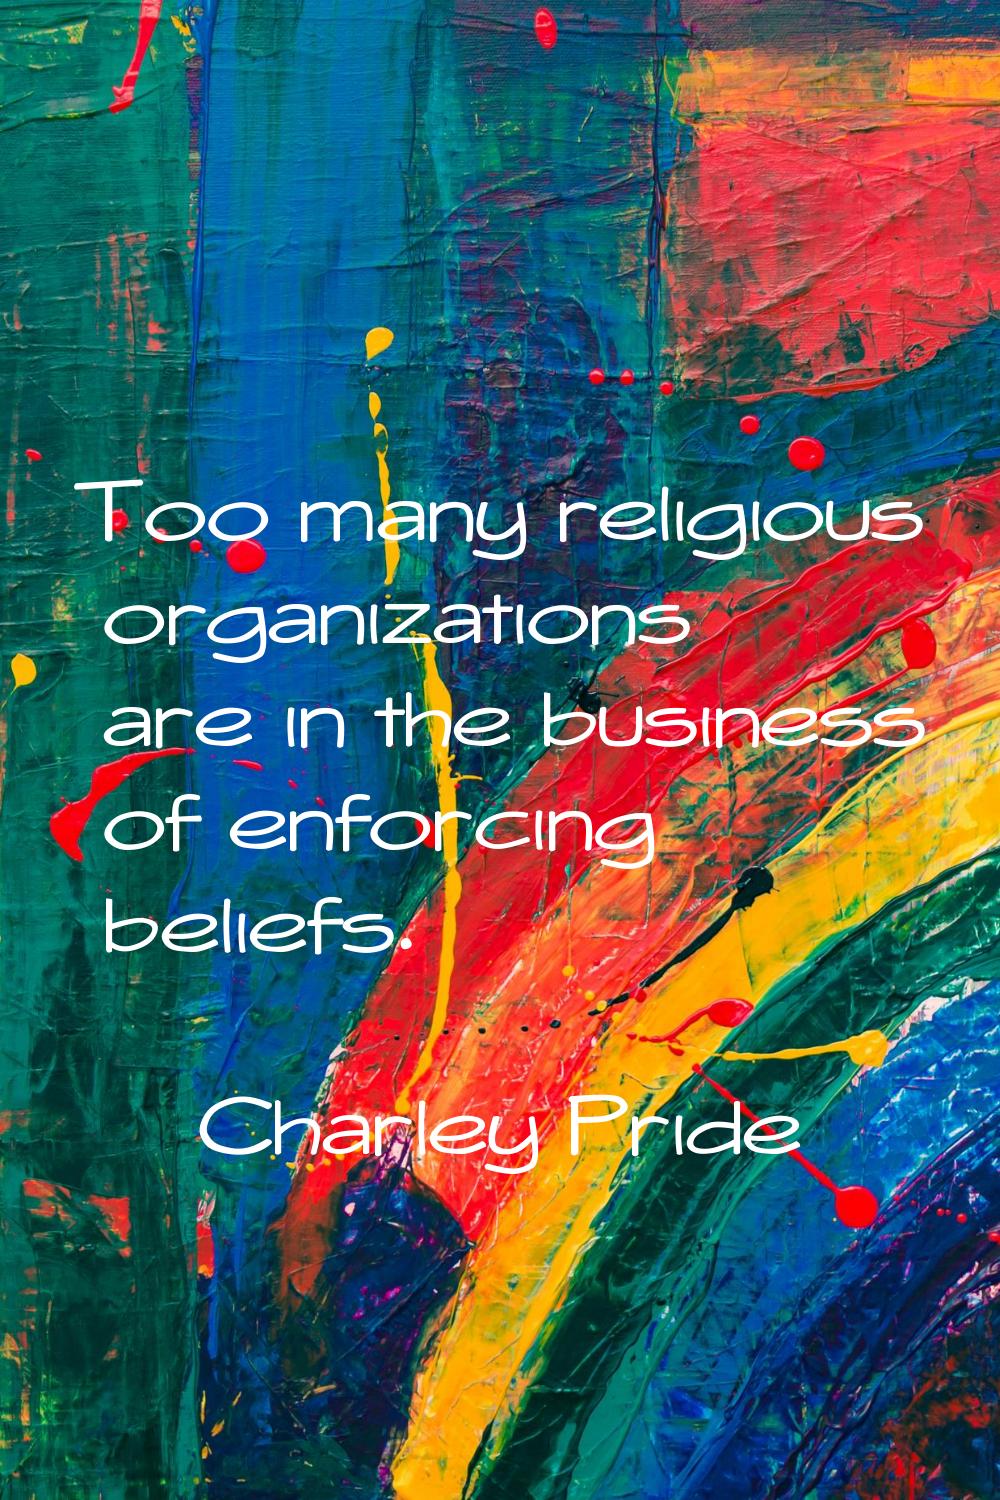 Too many religious organizations are in the business of enforcing beliefs.